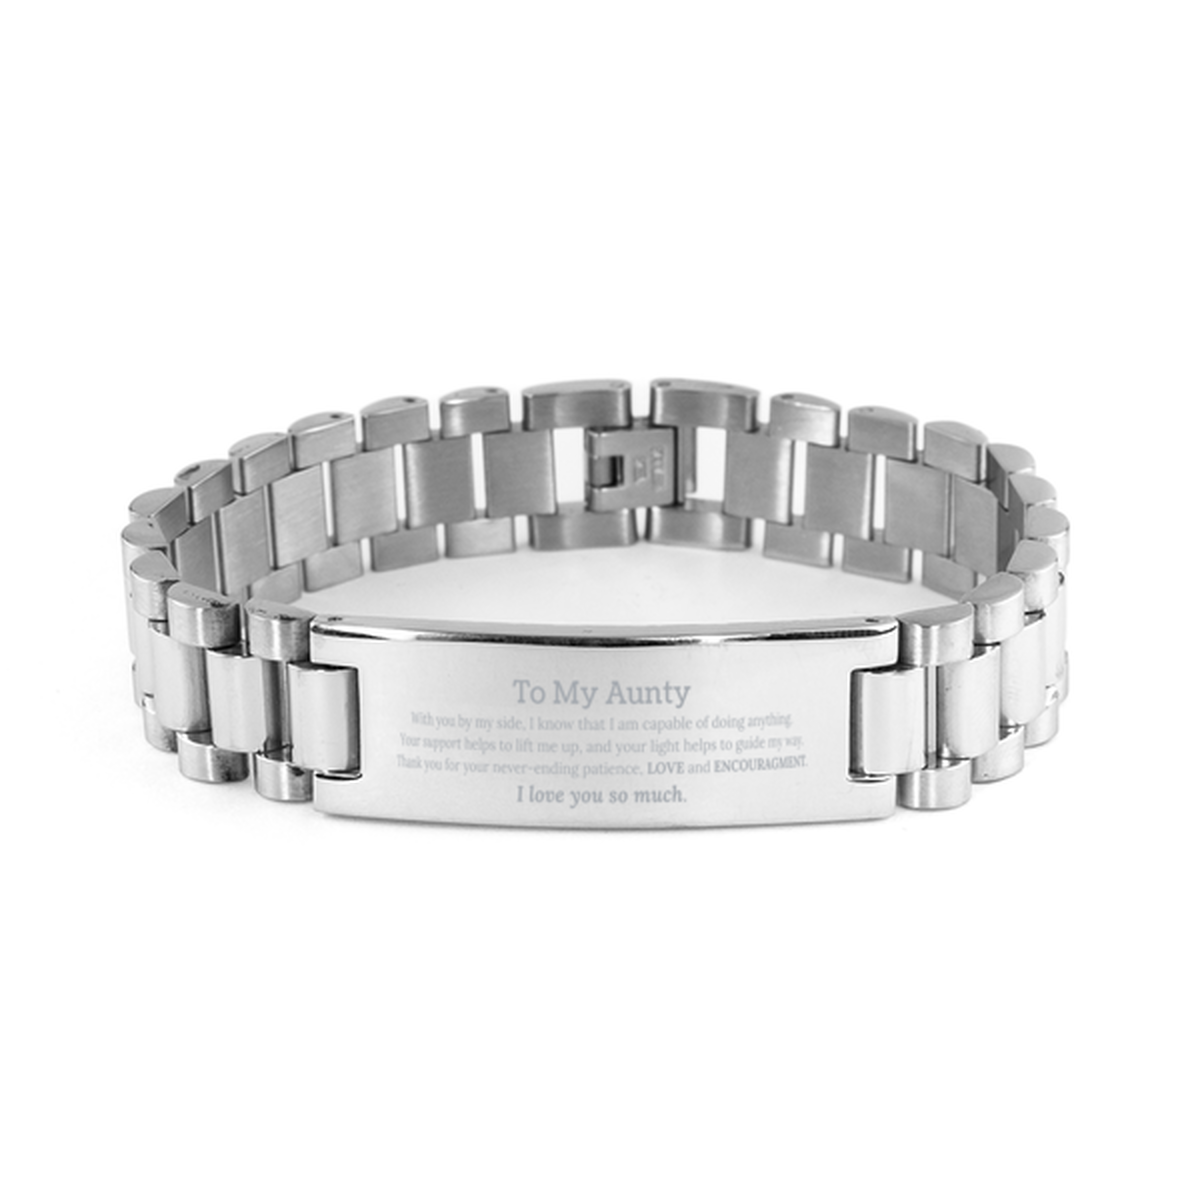 Appreciation Aunty Ladder Stainless Steel Bracelet Gifts, To My Aunty Birthday Christmas Wedding Keepsake Gifts for Aunty With you by my side, I know that I am capable of doing anything. I love you so much